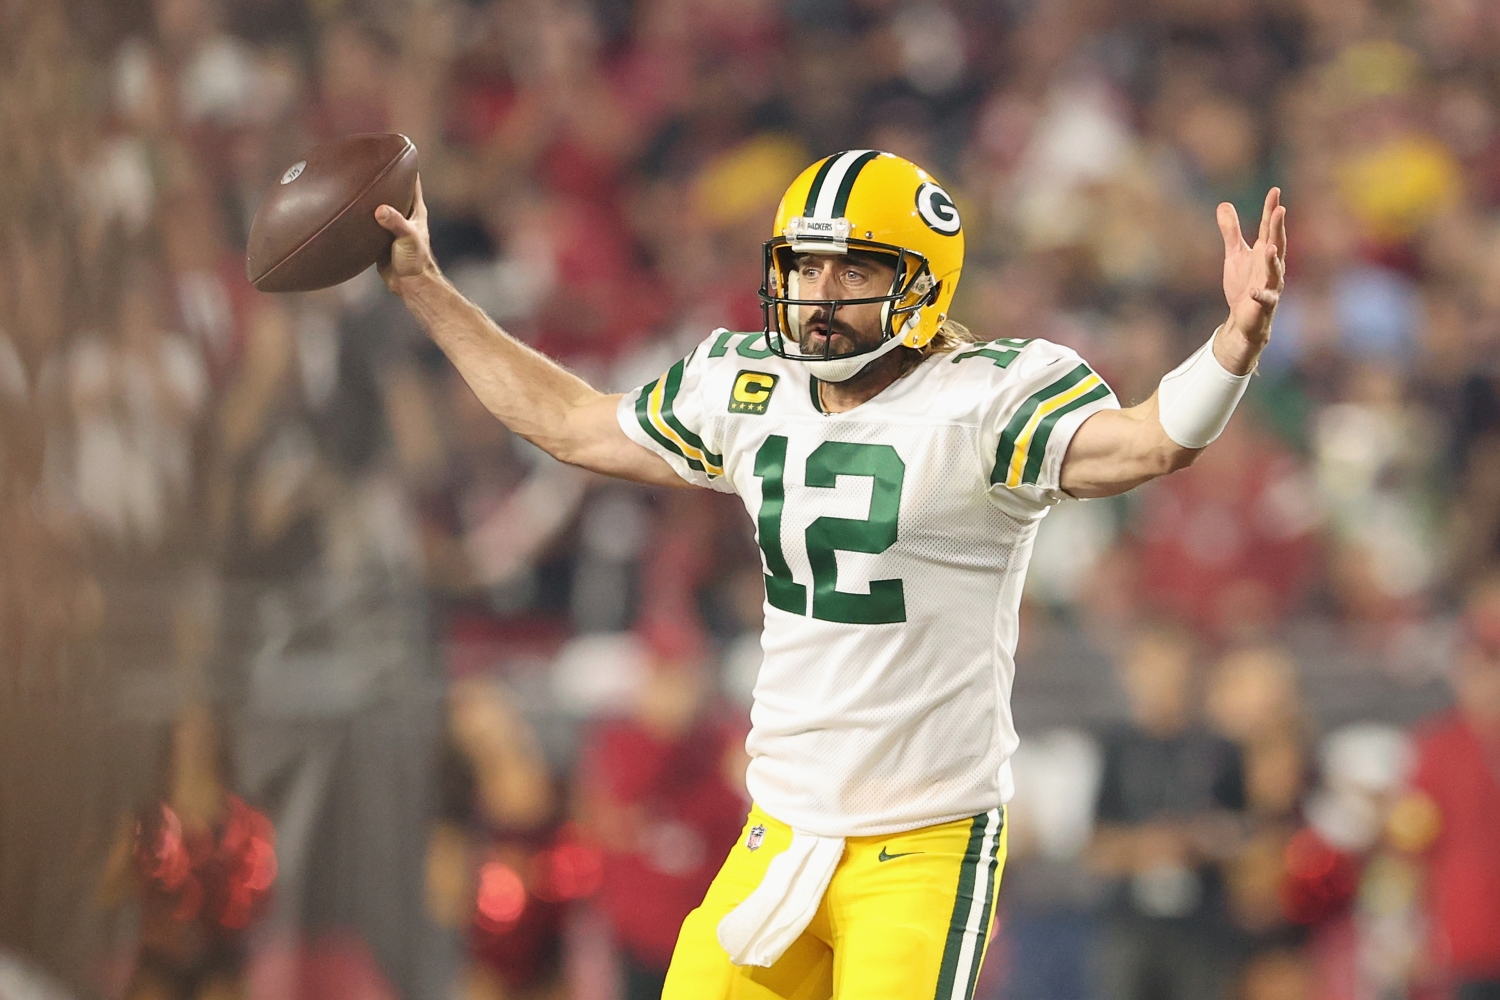 Green Bay Packers QB Aaron Rodgers reacts after a play against the Arizona Cardinals.